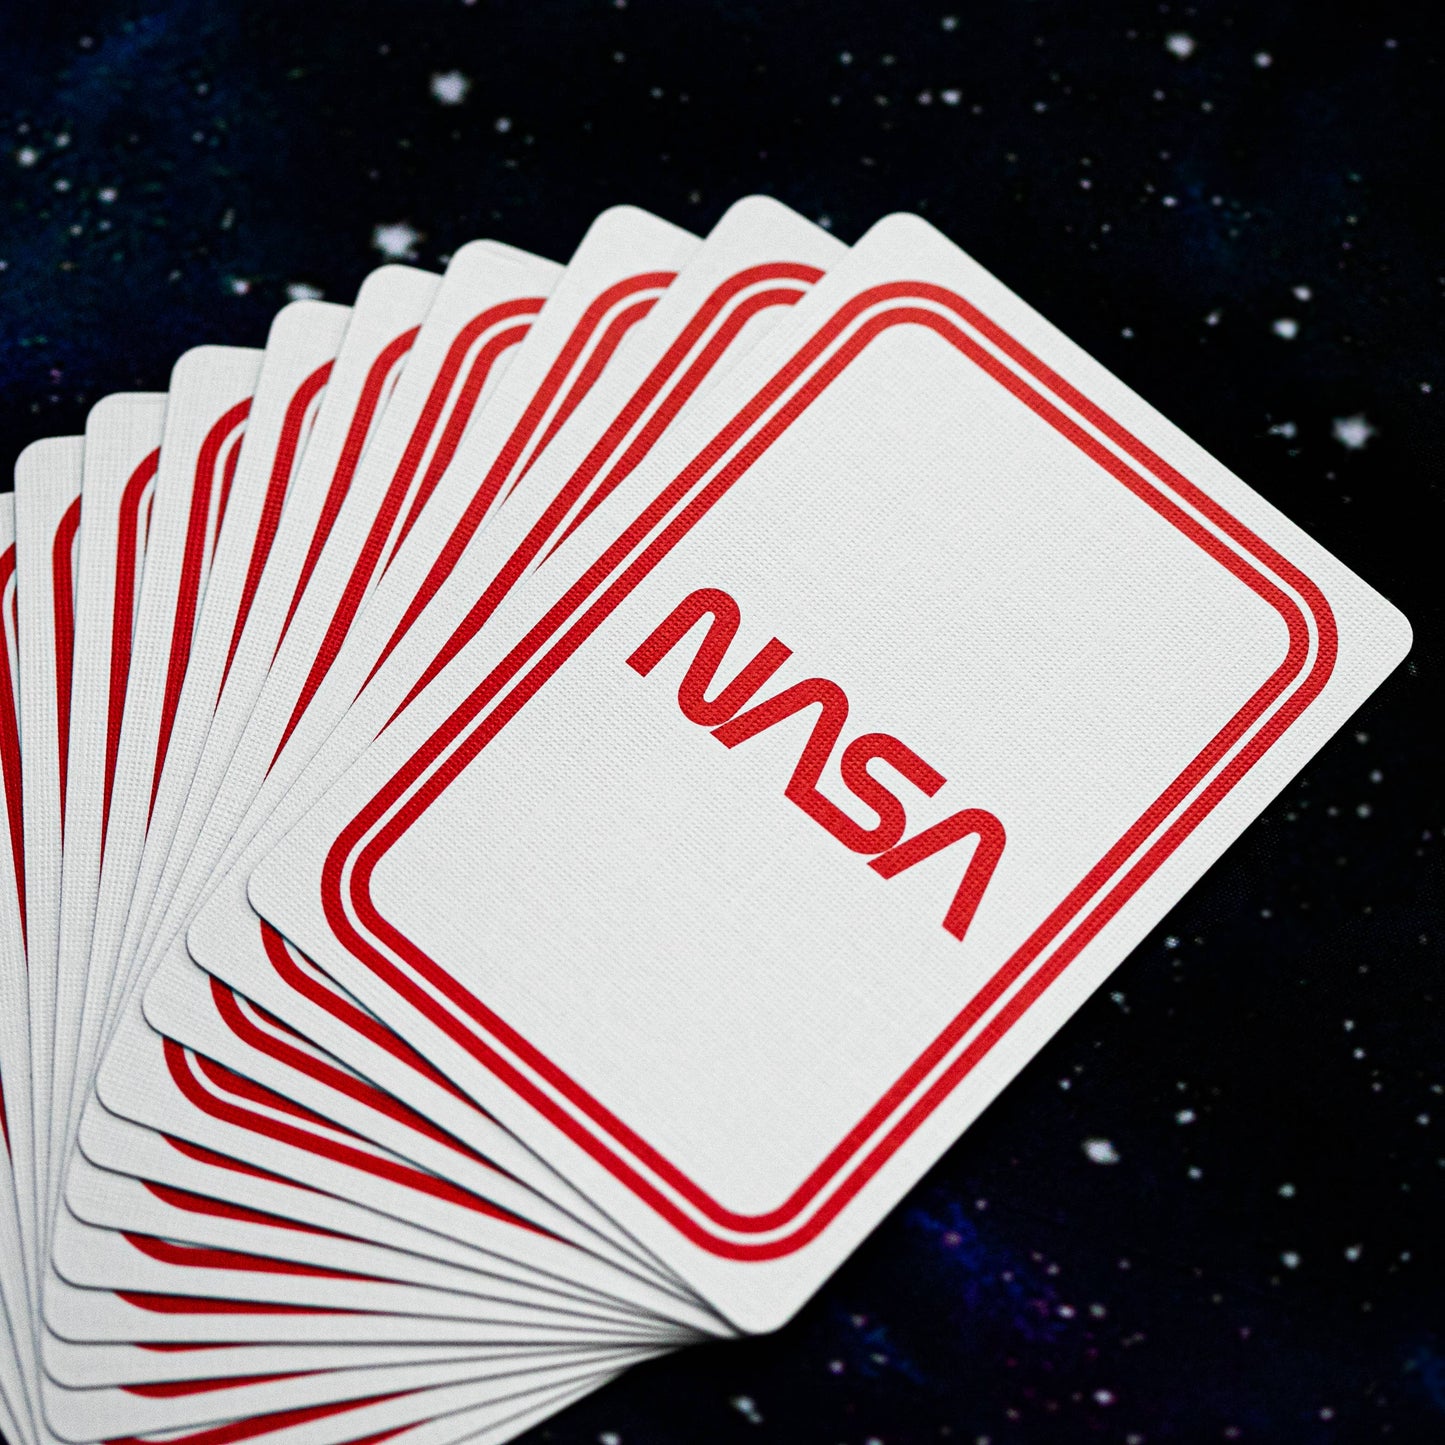 OFFICIAL NASA WORM PLAYING CARDS MADE IN THE USA - Stemcell Science Shop